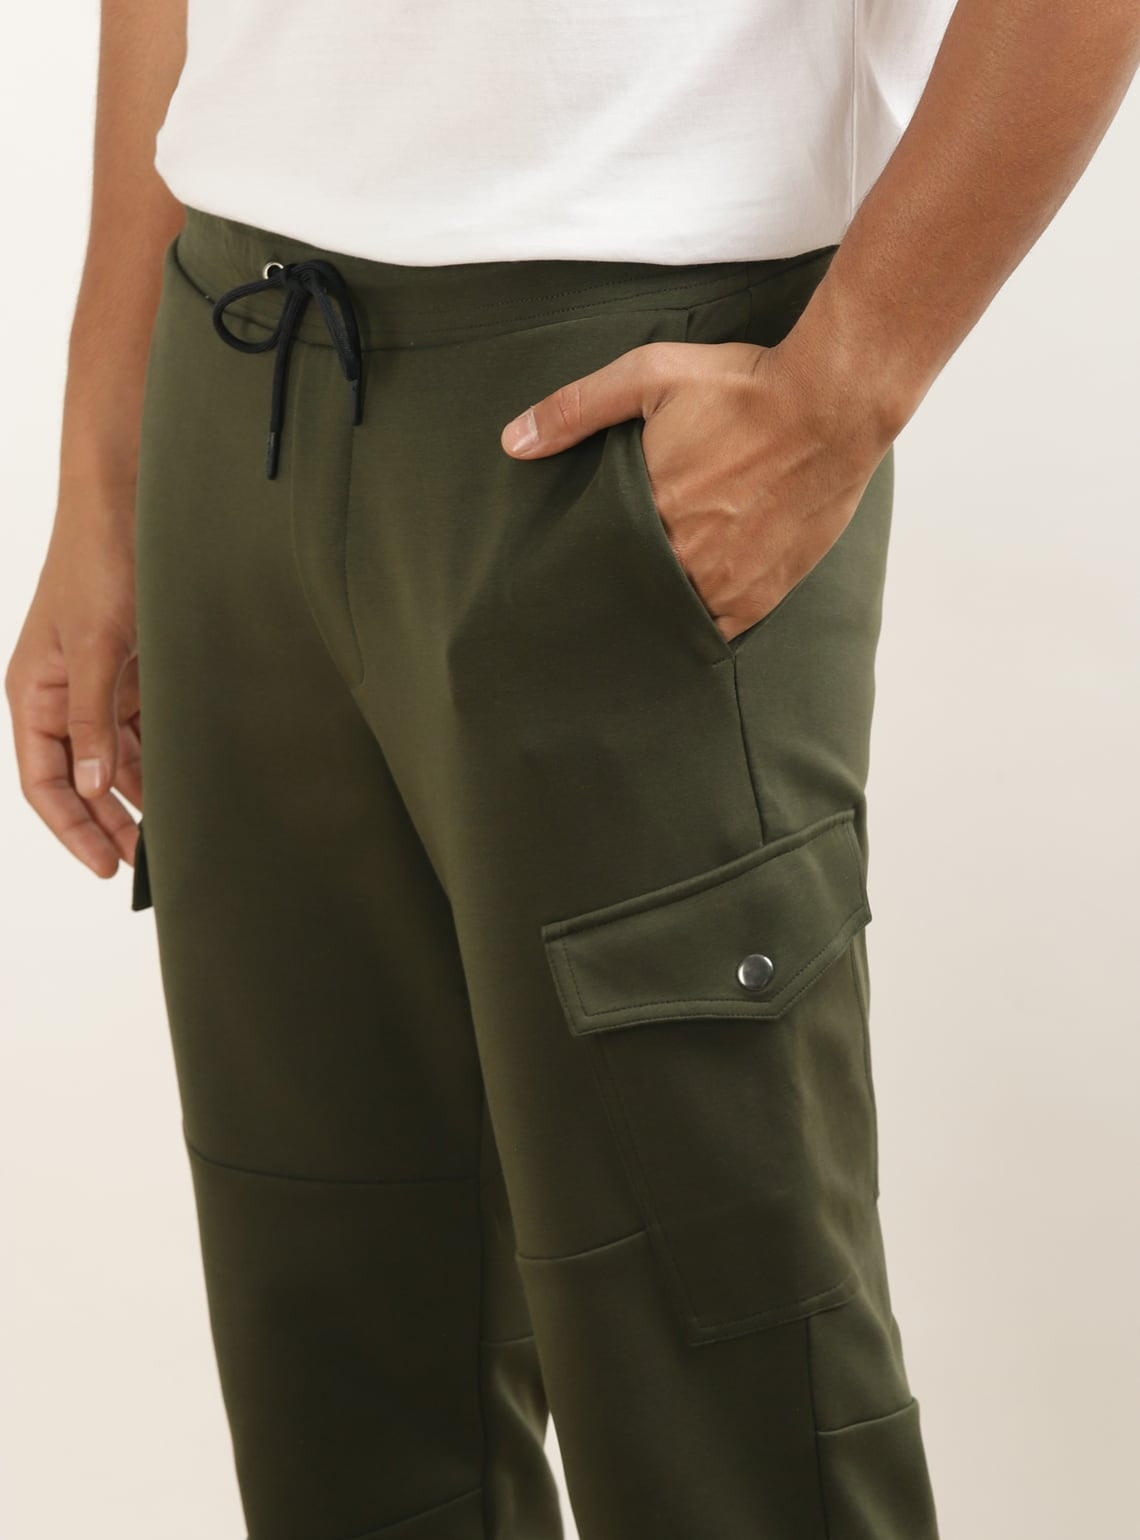 Castle Olive Joggers